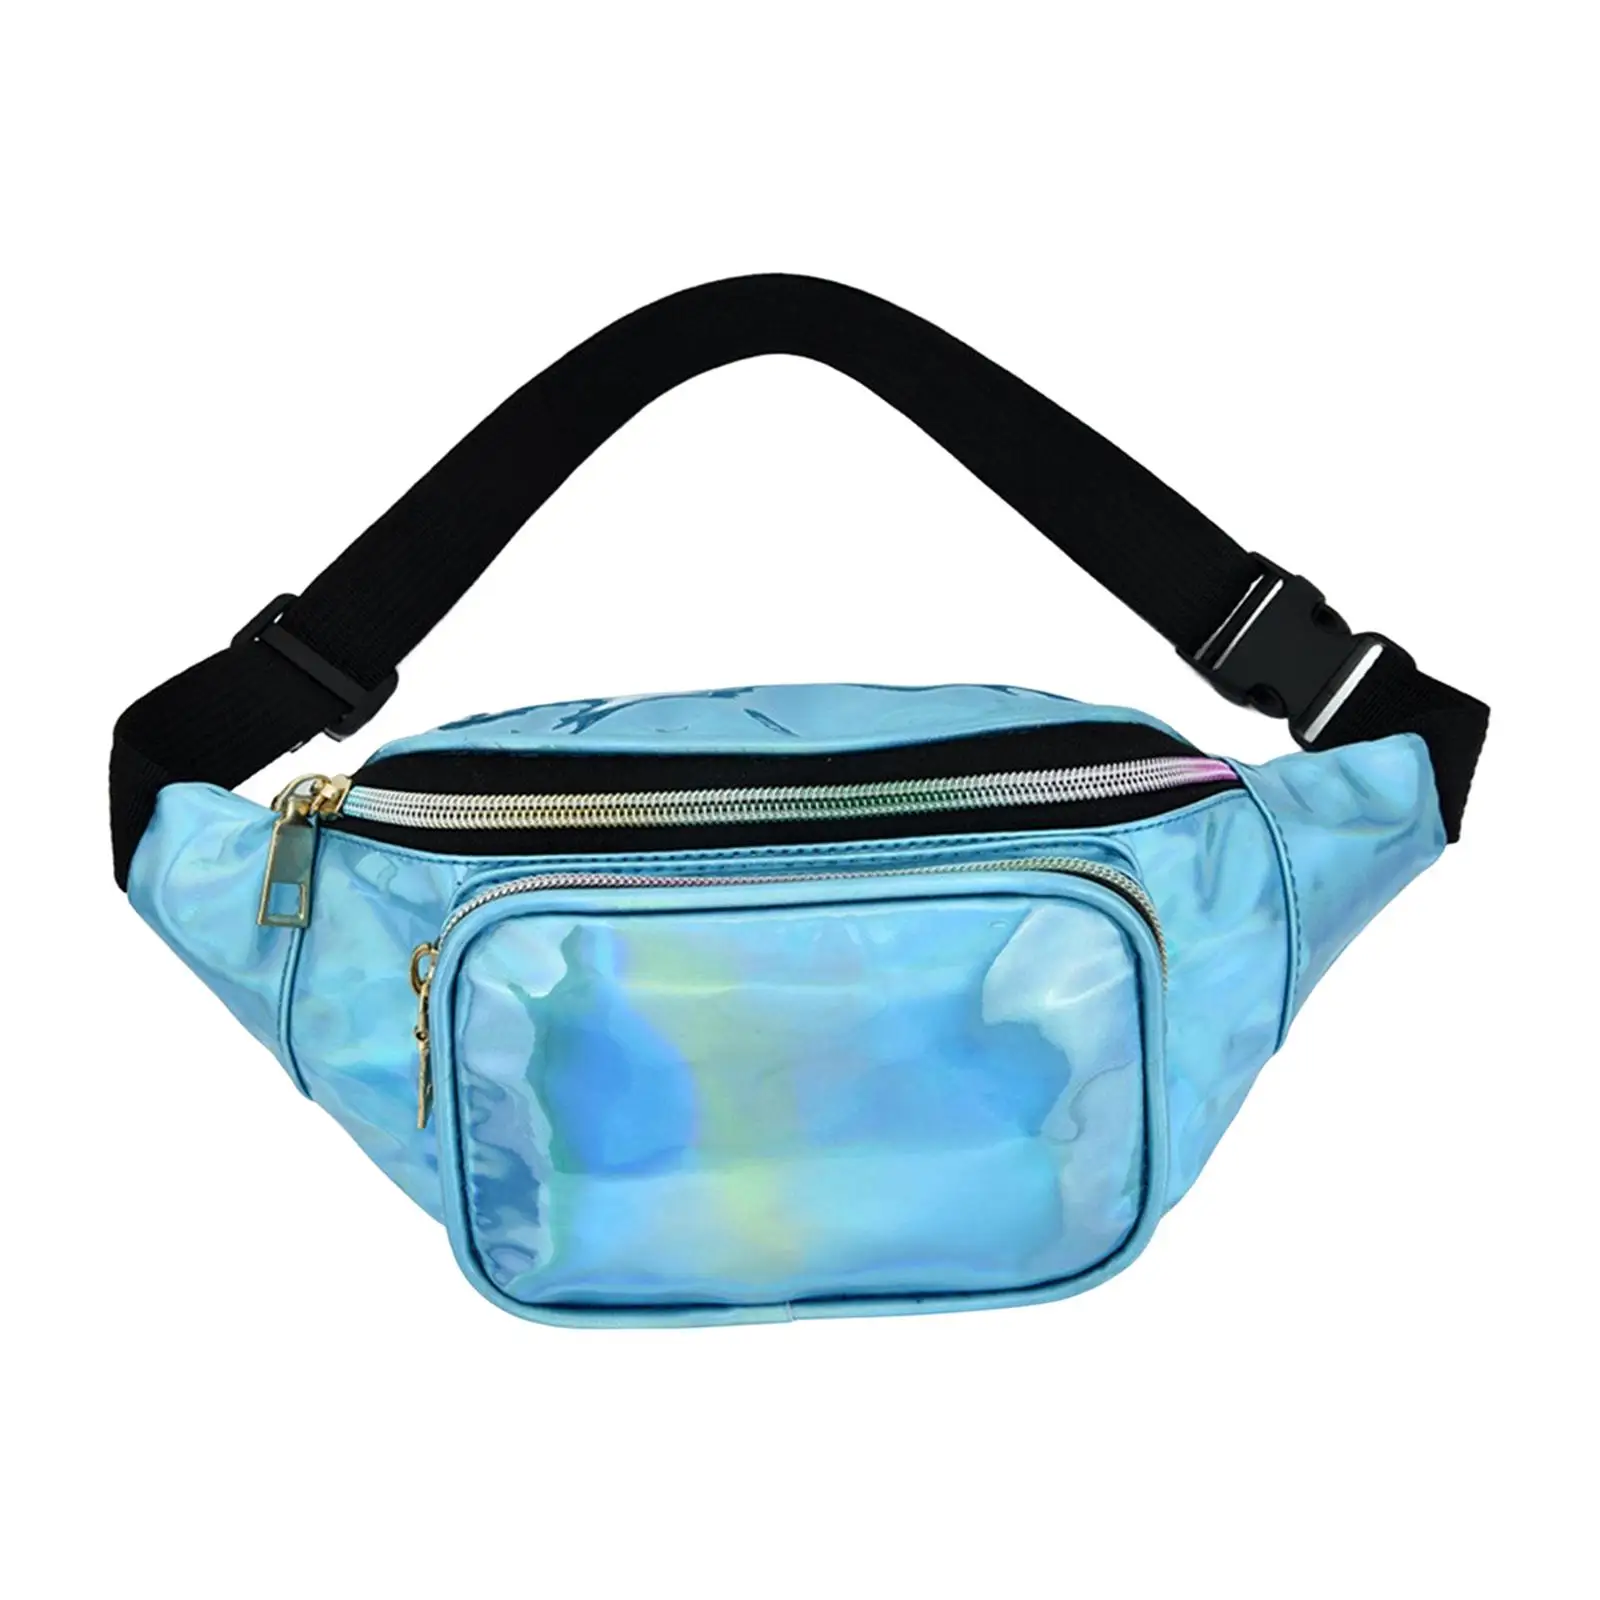 Waist Bag with Adjustable Belt Small Pouch Holographic Chest Pocket Water Resistant for Running Headphone Women Men Unisex